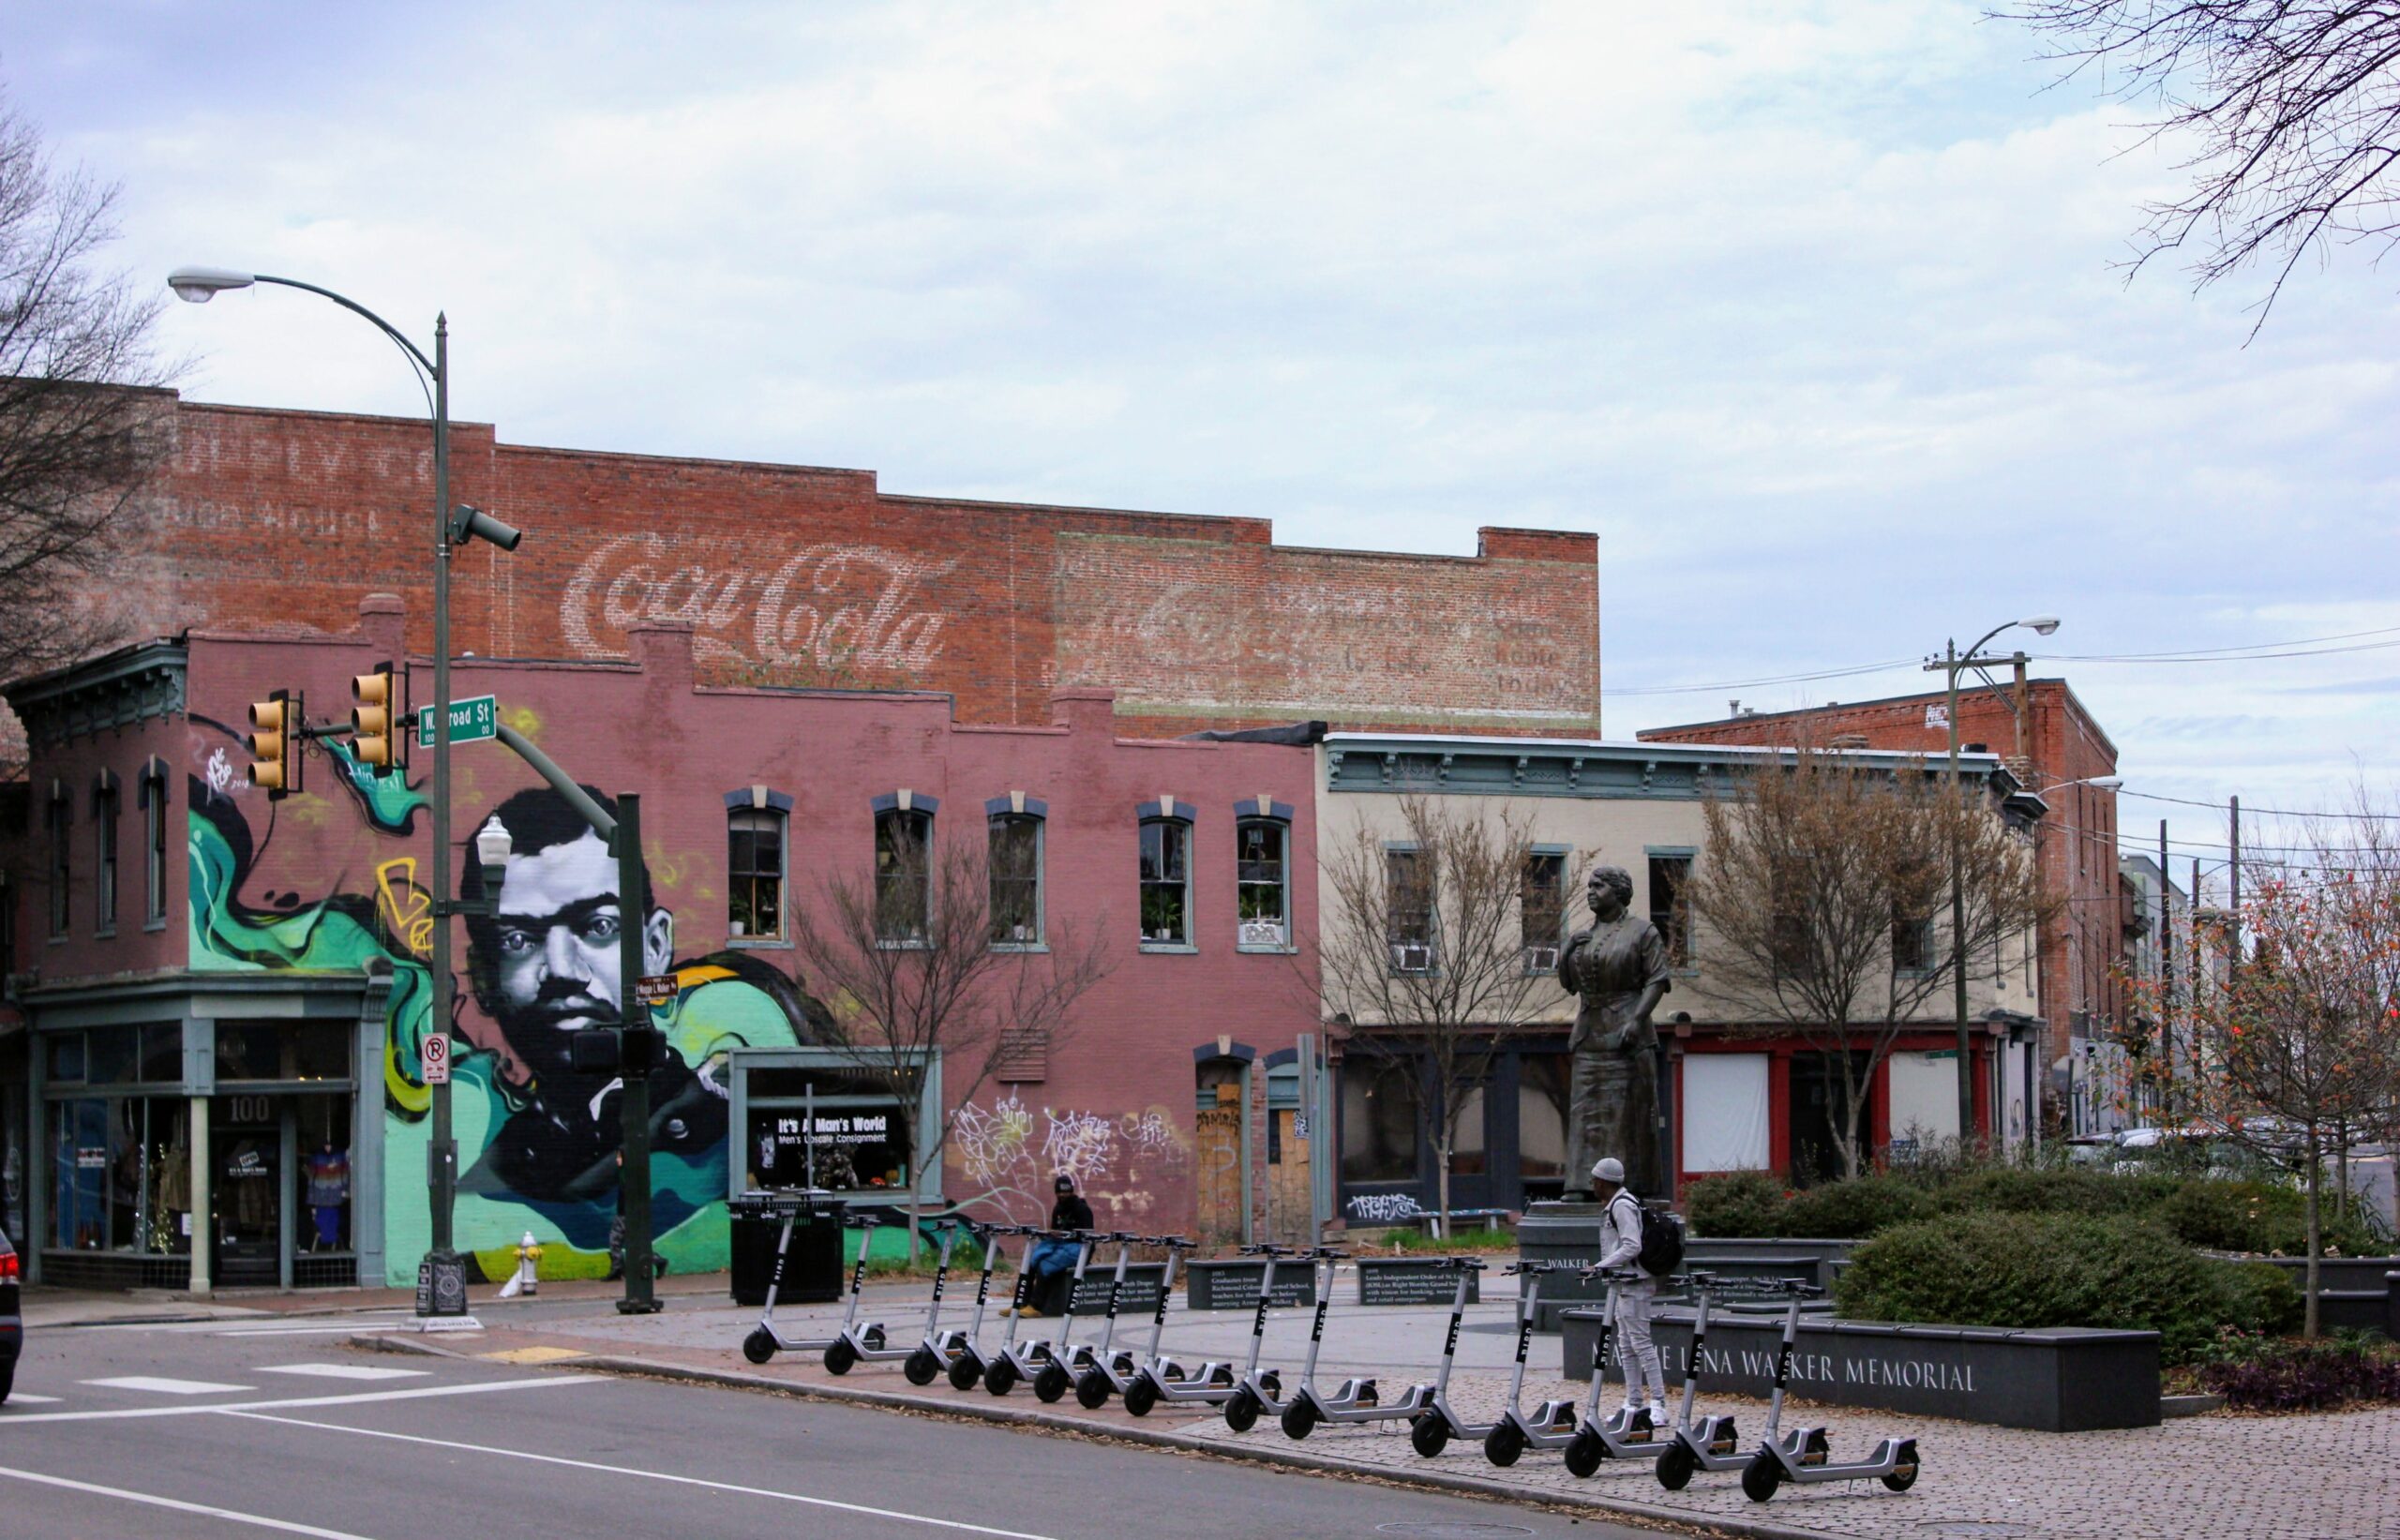 Street view of a mural in the Arts District in Richmond VA